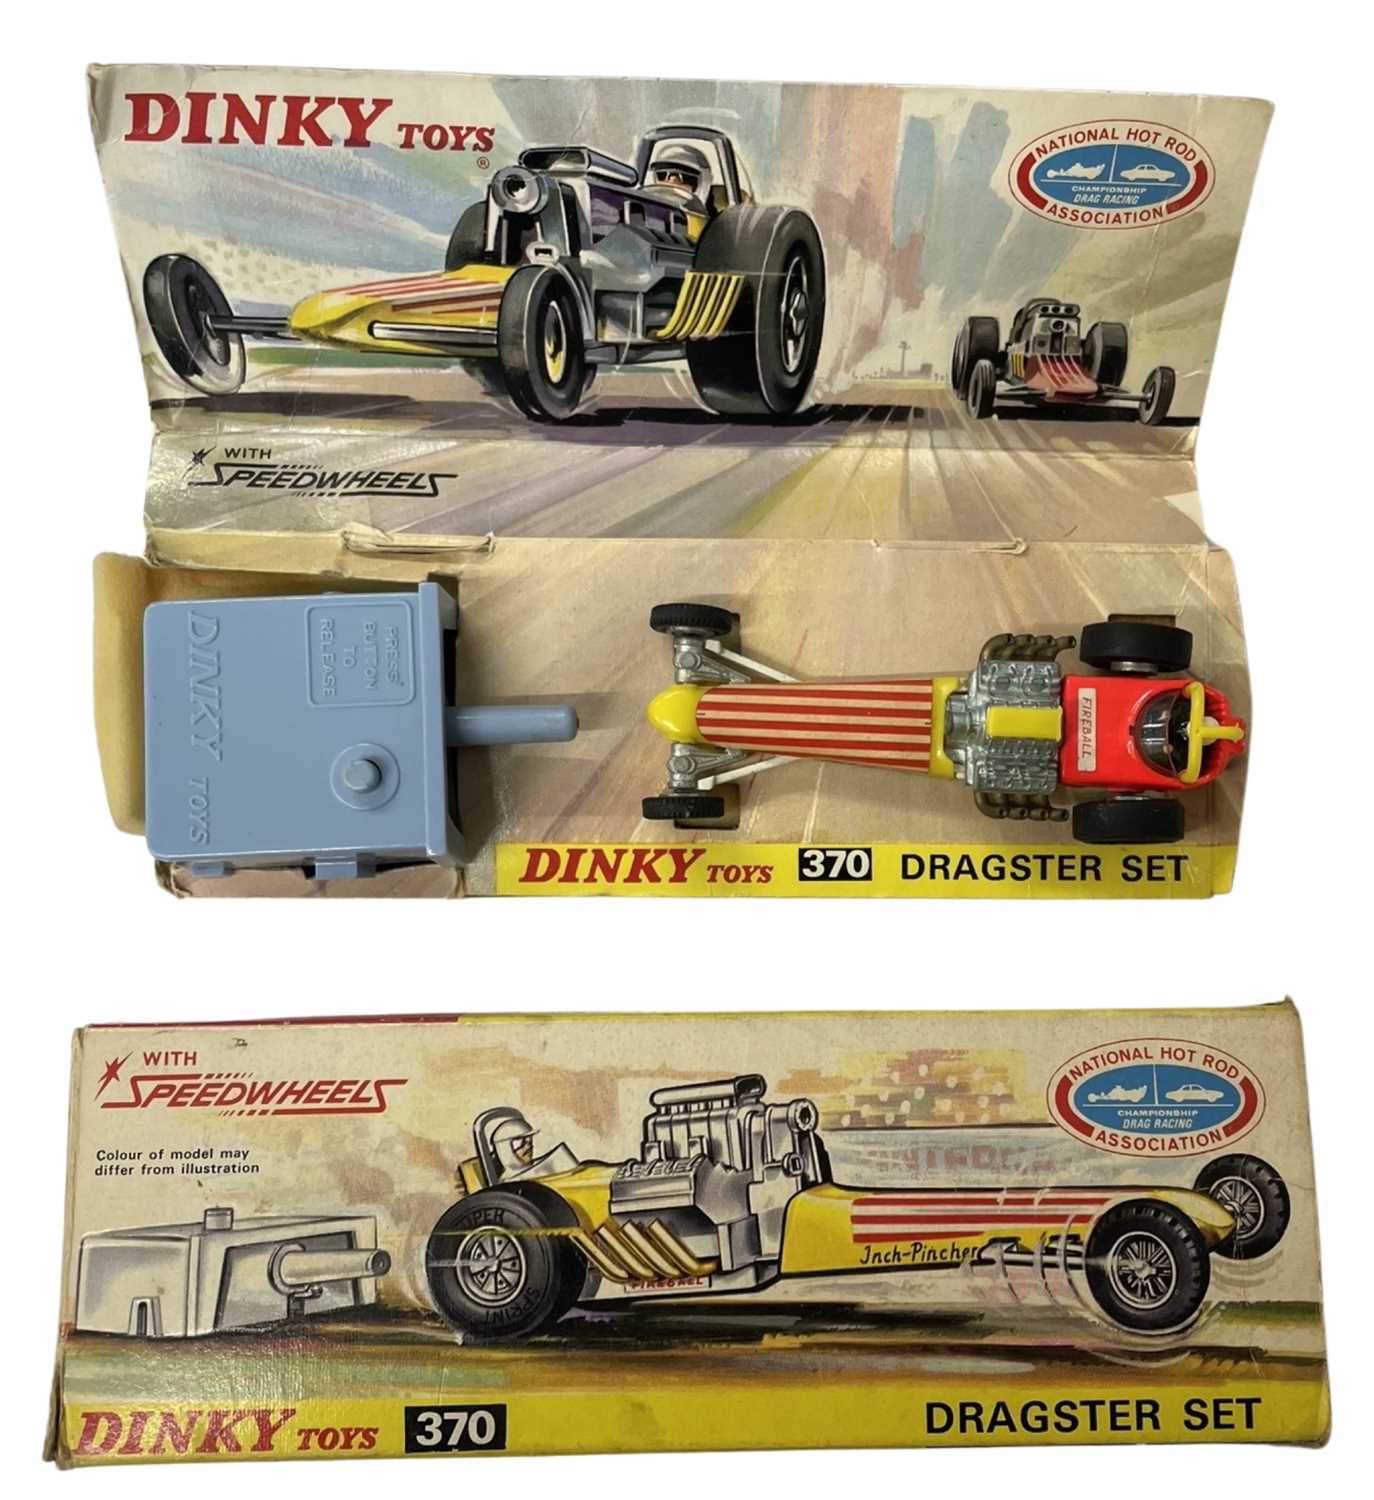 A boxed Dinky 370 Dragster set